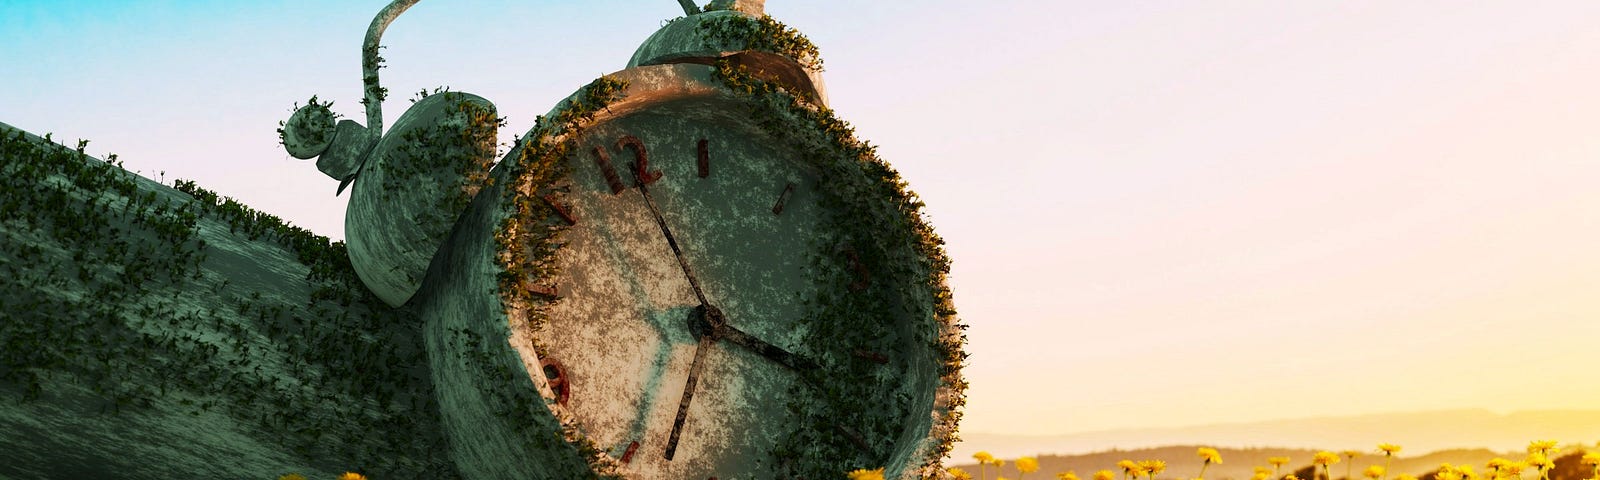 color image of a giant alarm clock toppled on its side in a meadow of yellow flowers